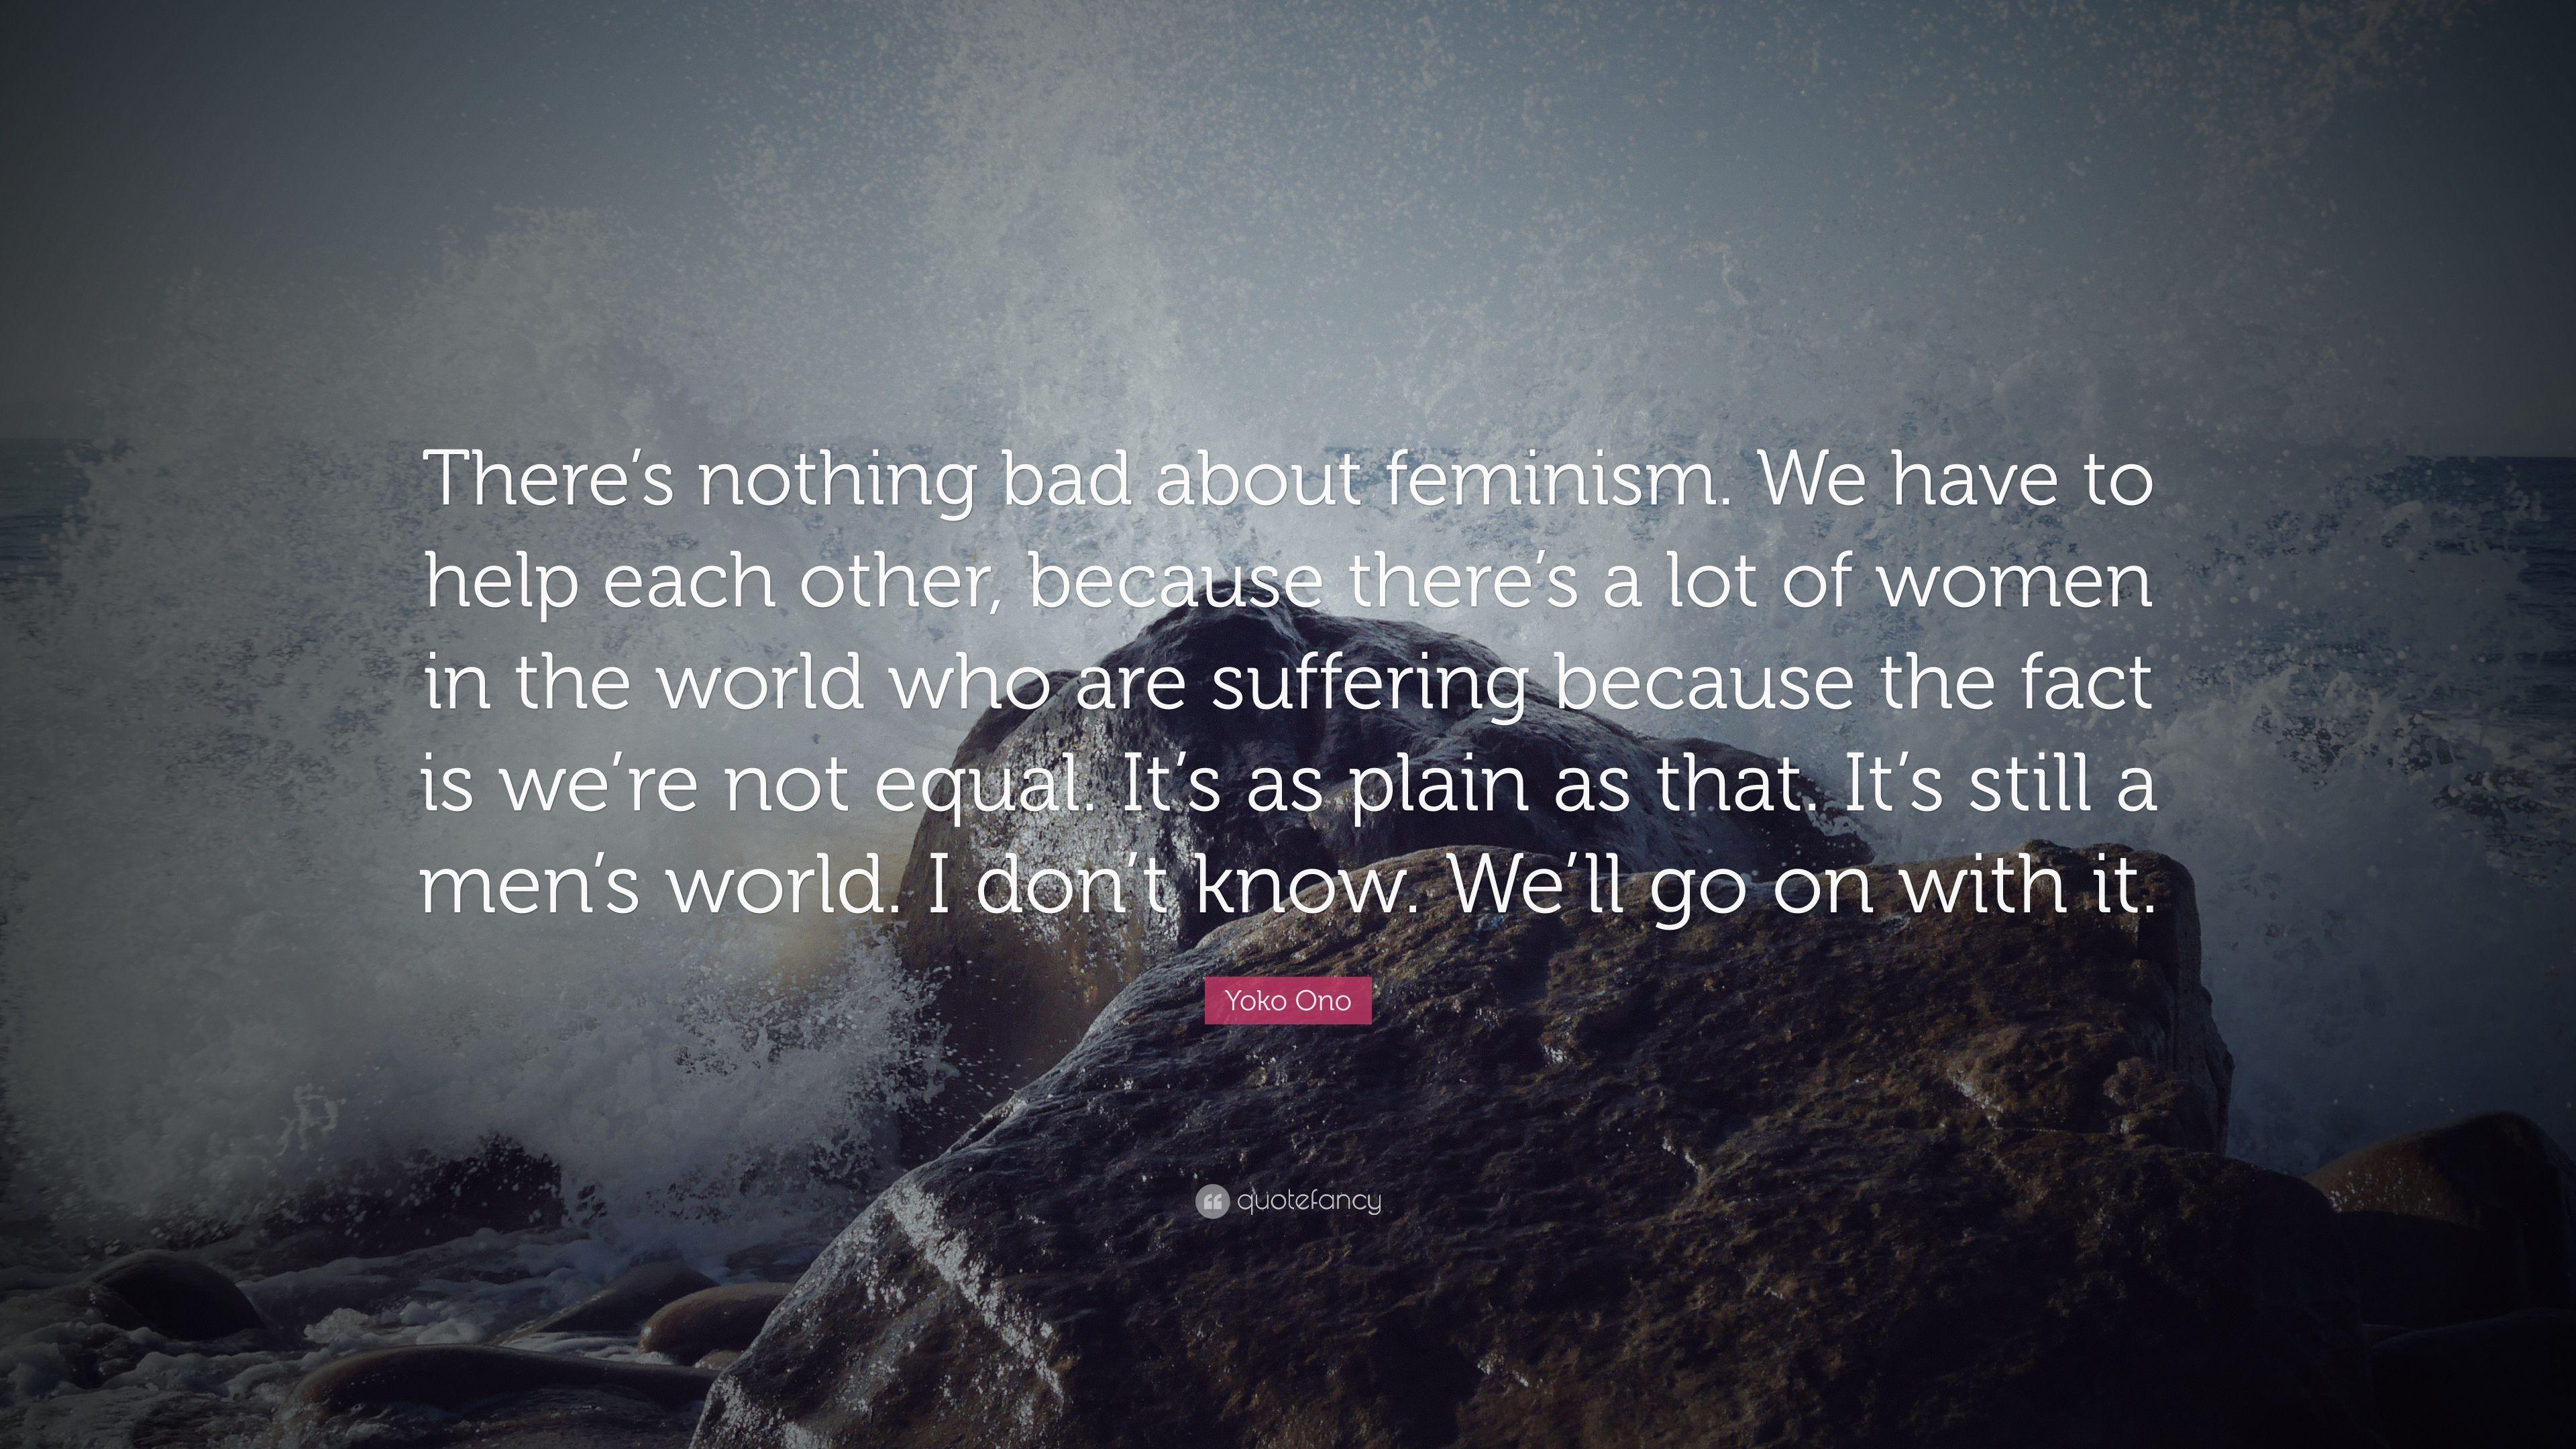 Yoko Ono Quote: “There's nothing bad about feminism. We have to